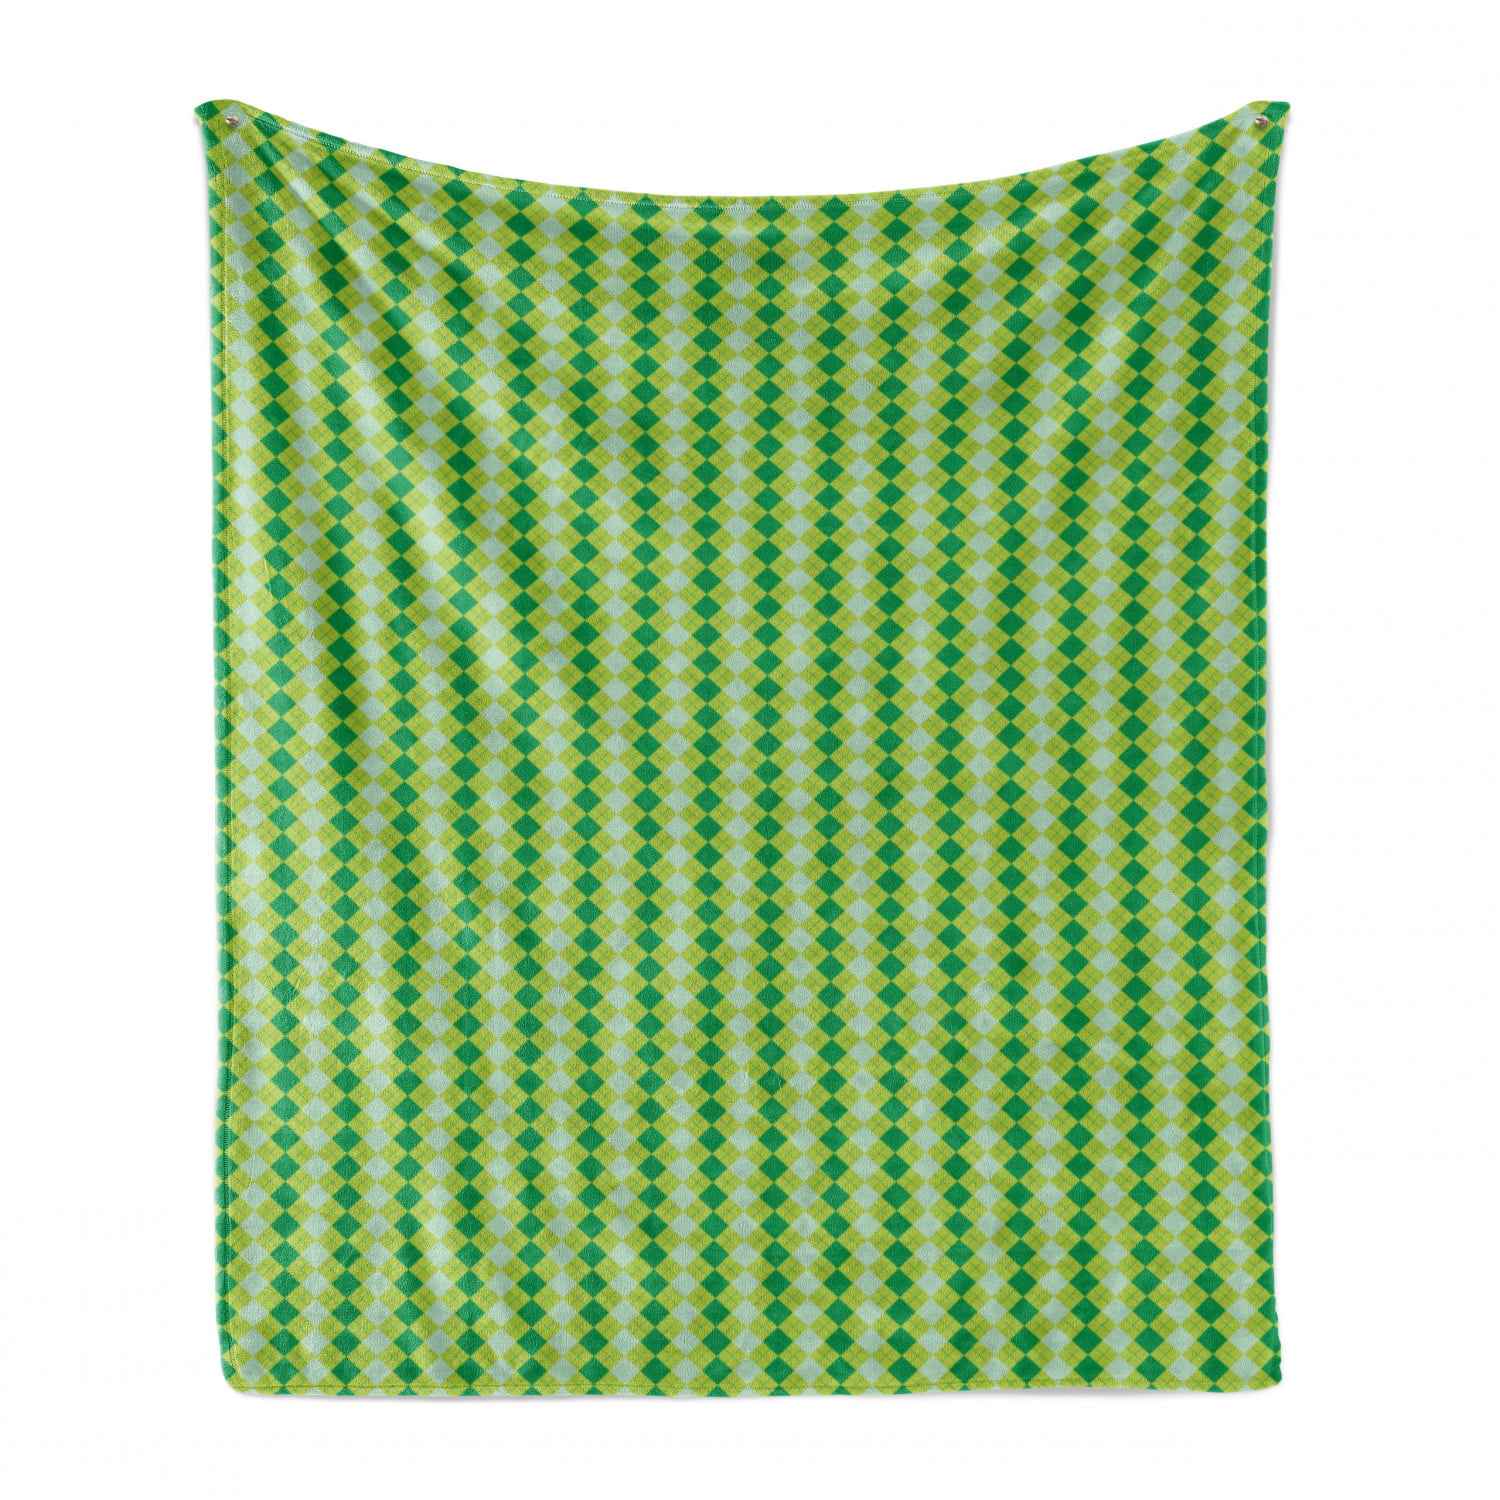 Monochrome Geometric Pattern with Diagonal Square Check 50 x 60 Green Almond Green Cozy Plush for Indoor and Outdoor Use Ambesonne Abstract Green Soft Flannel Fleece Throw Blanket 